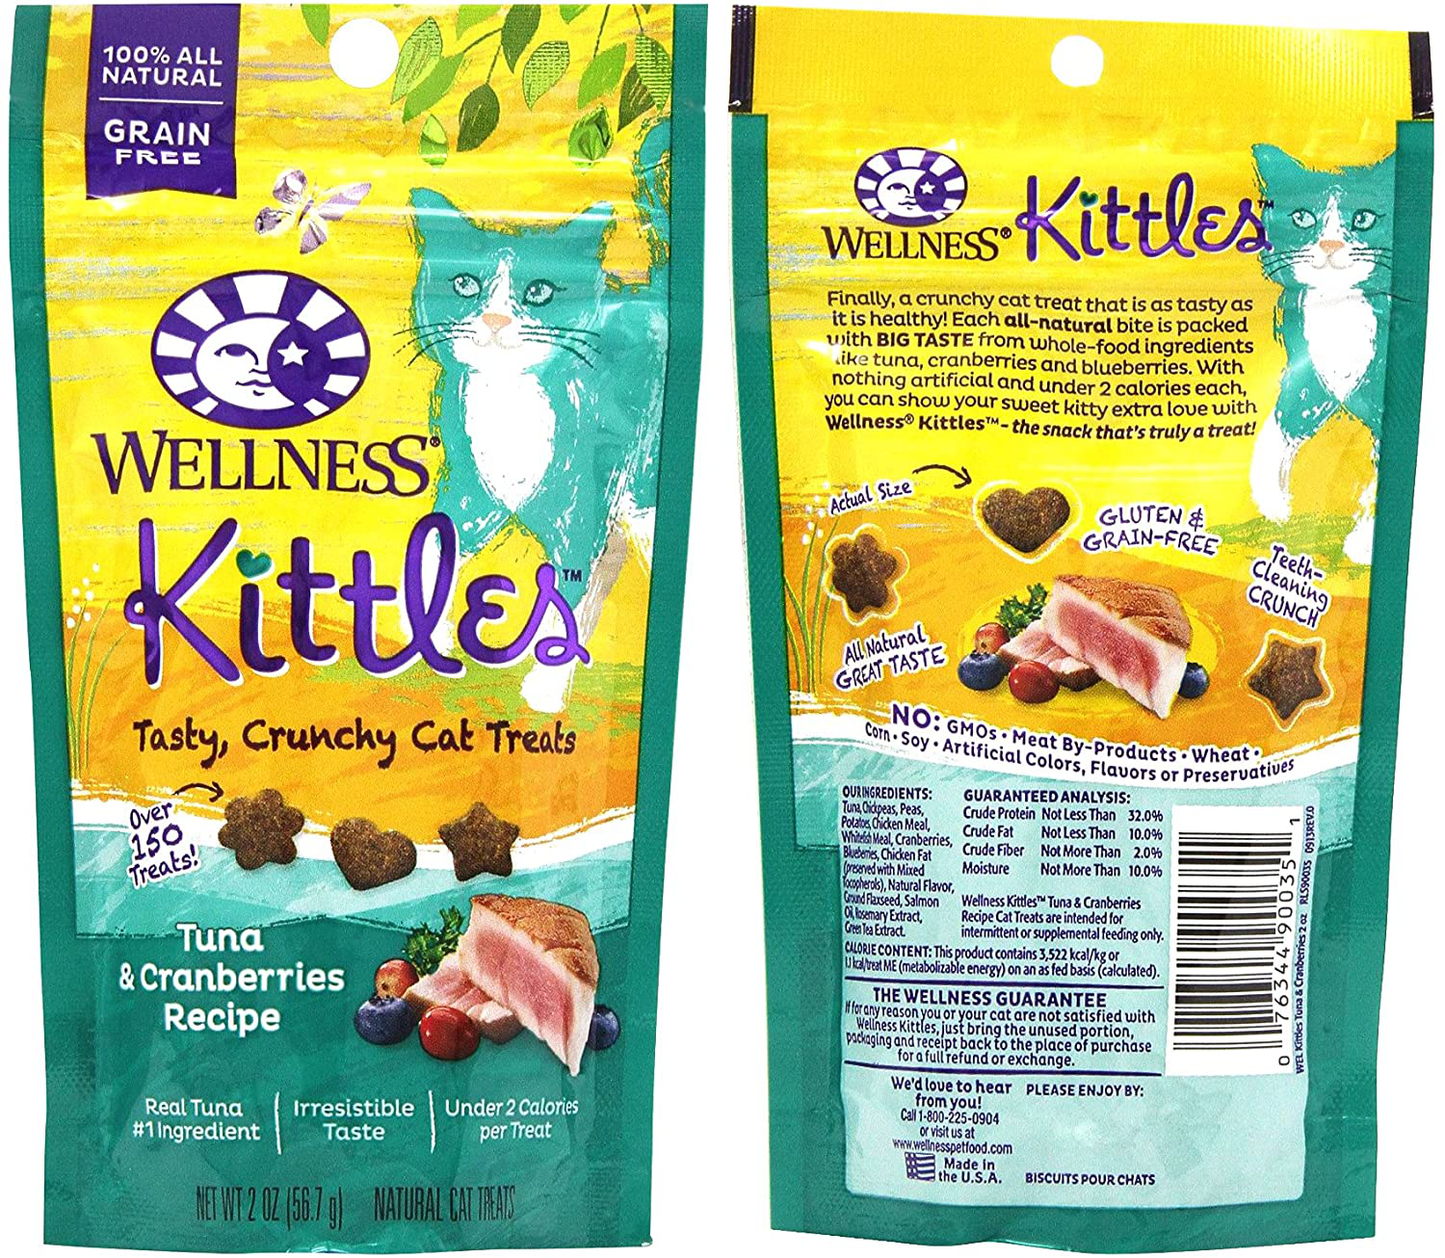 Wellness Kittles Cat Treat Variety Pack - 3 Flavors (Chicken & Cranberries, Salmon & Cranberries, and Tuna & Cranberries Flavors) - 2 Oz Each (3 Total Pouches)